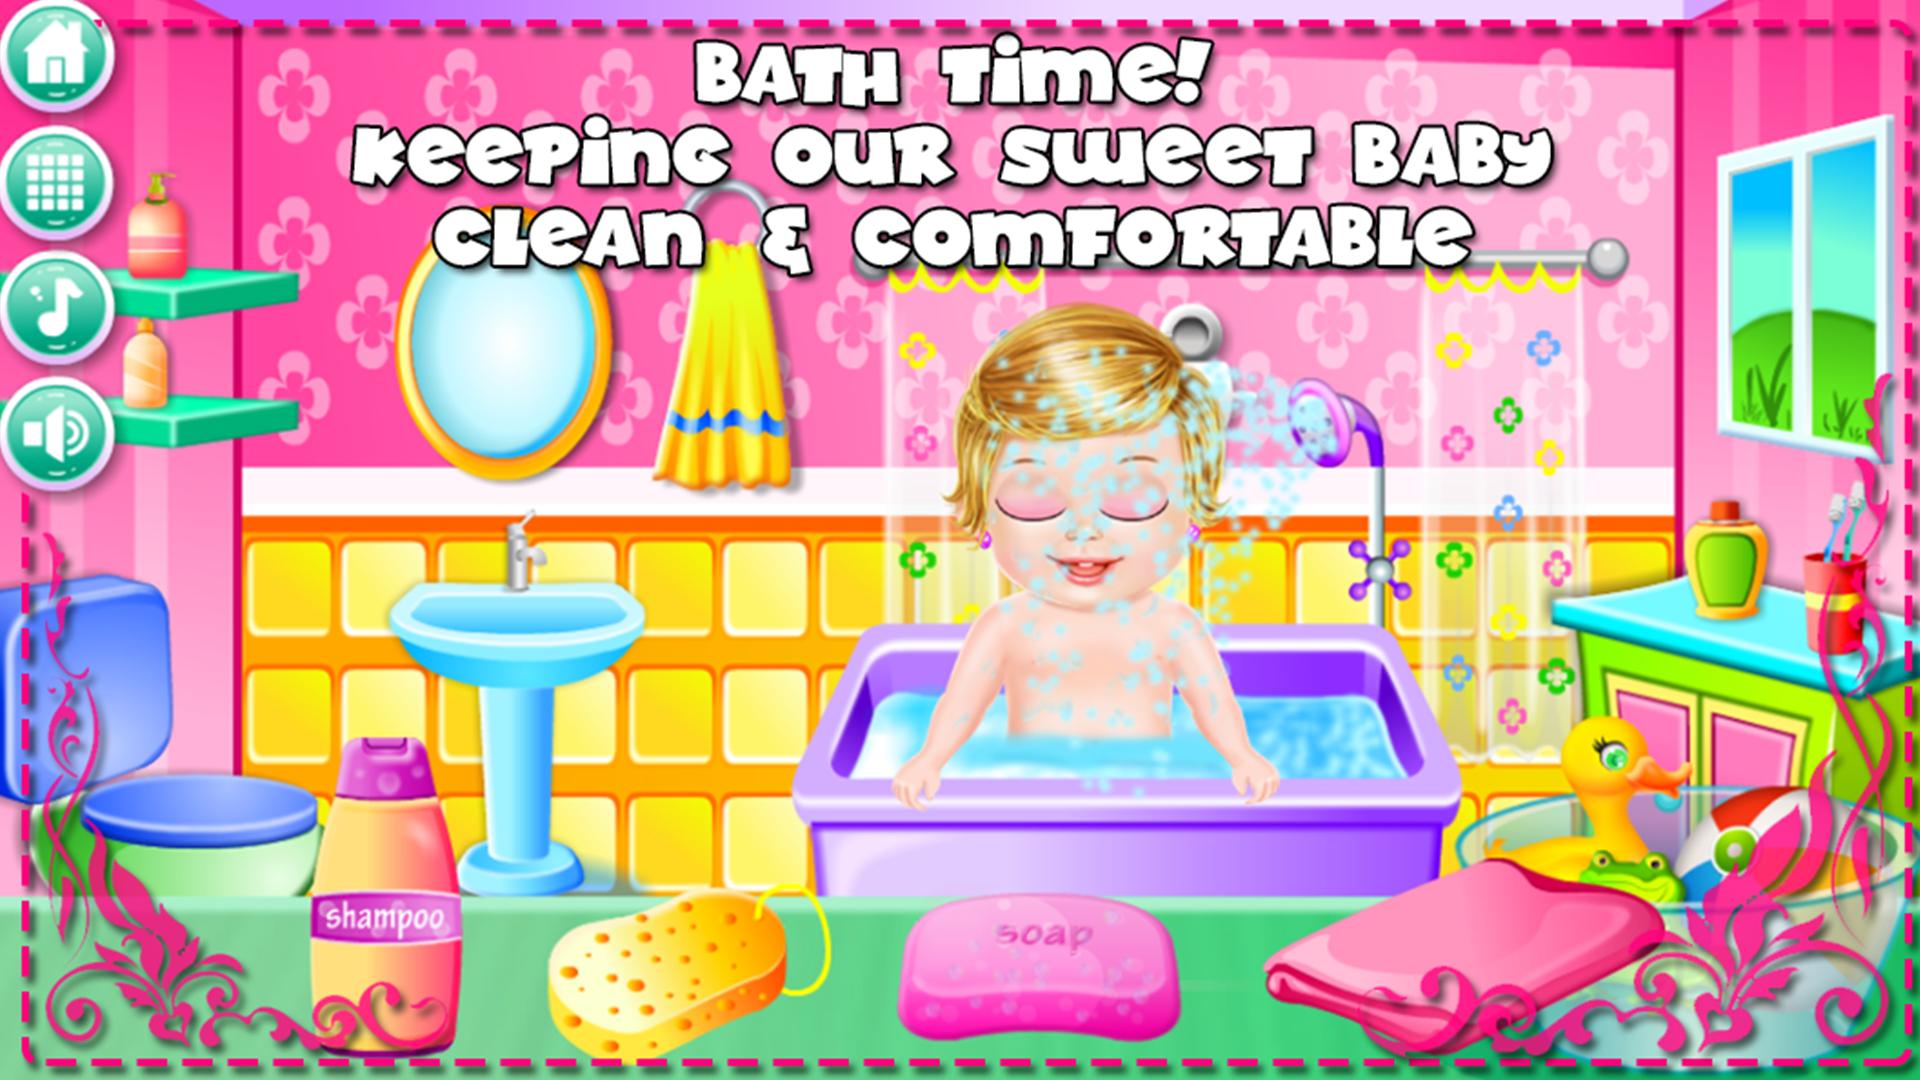 Baby Care game Android. Sweet Baby игры РС. Baby Bathtime caring games. Newborn Baby Care Kids games Android.